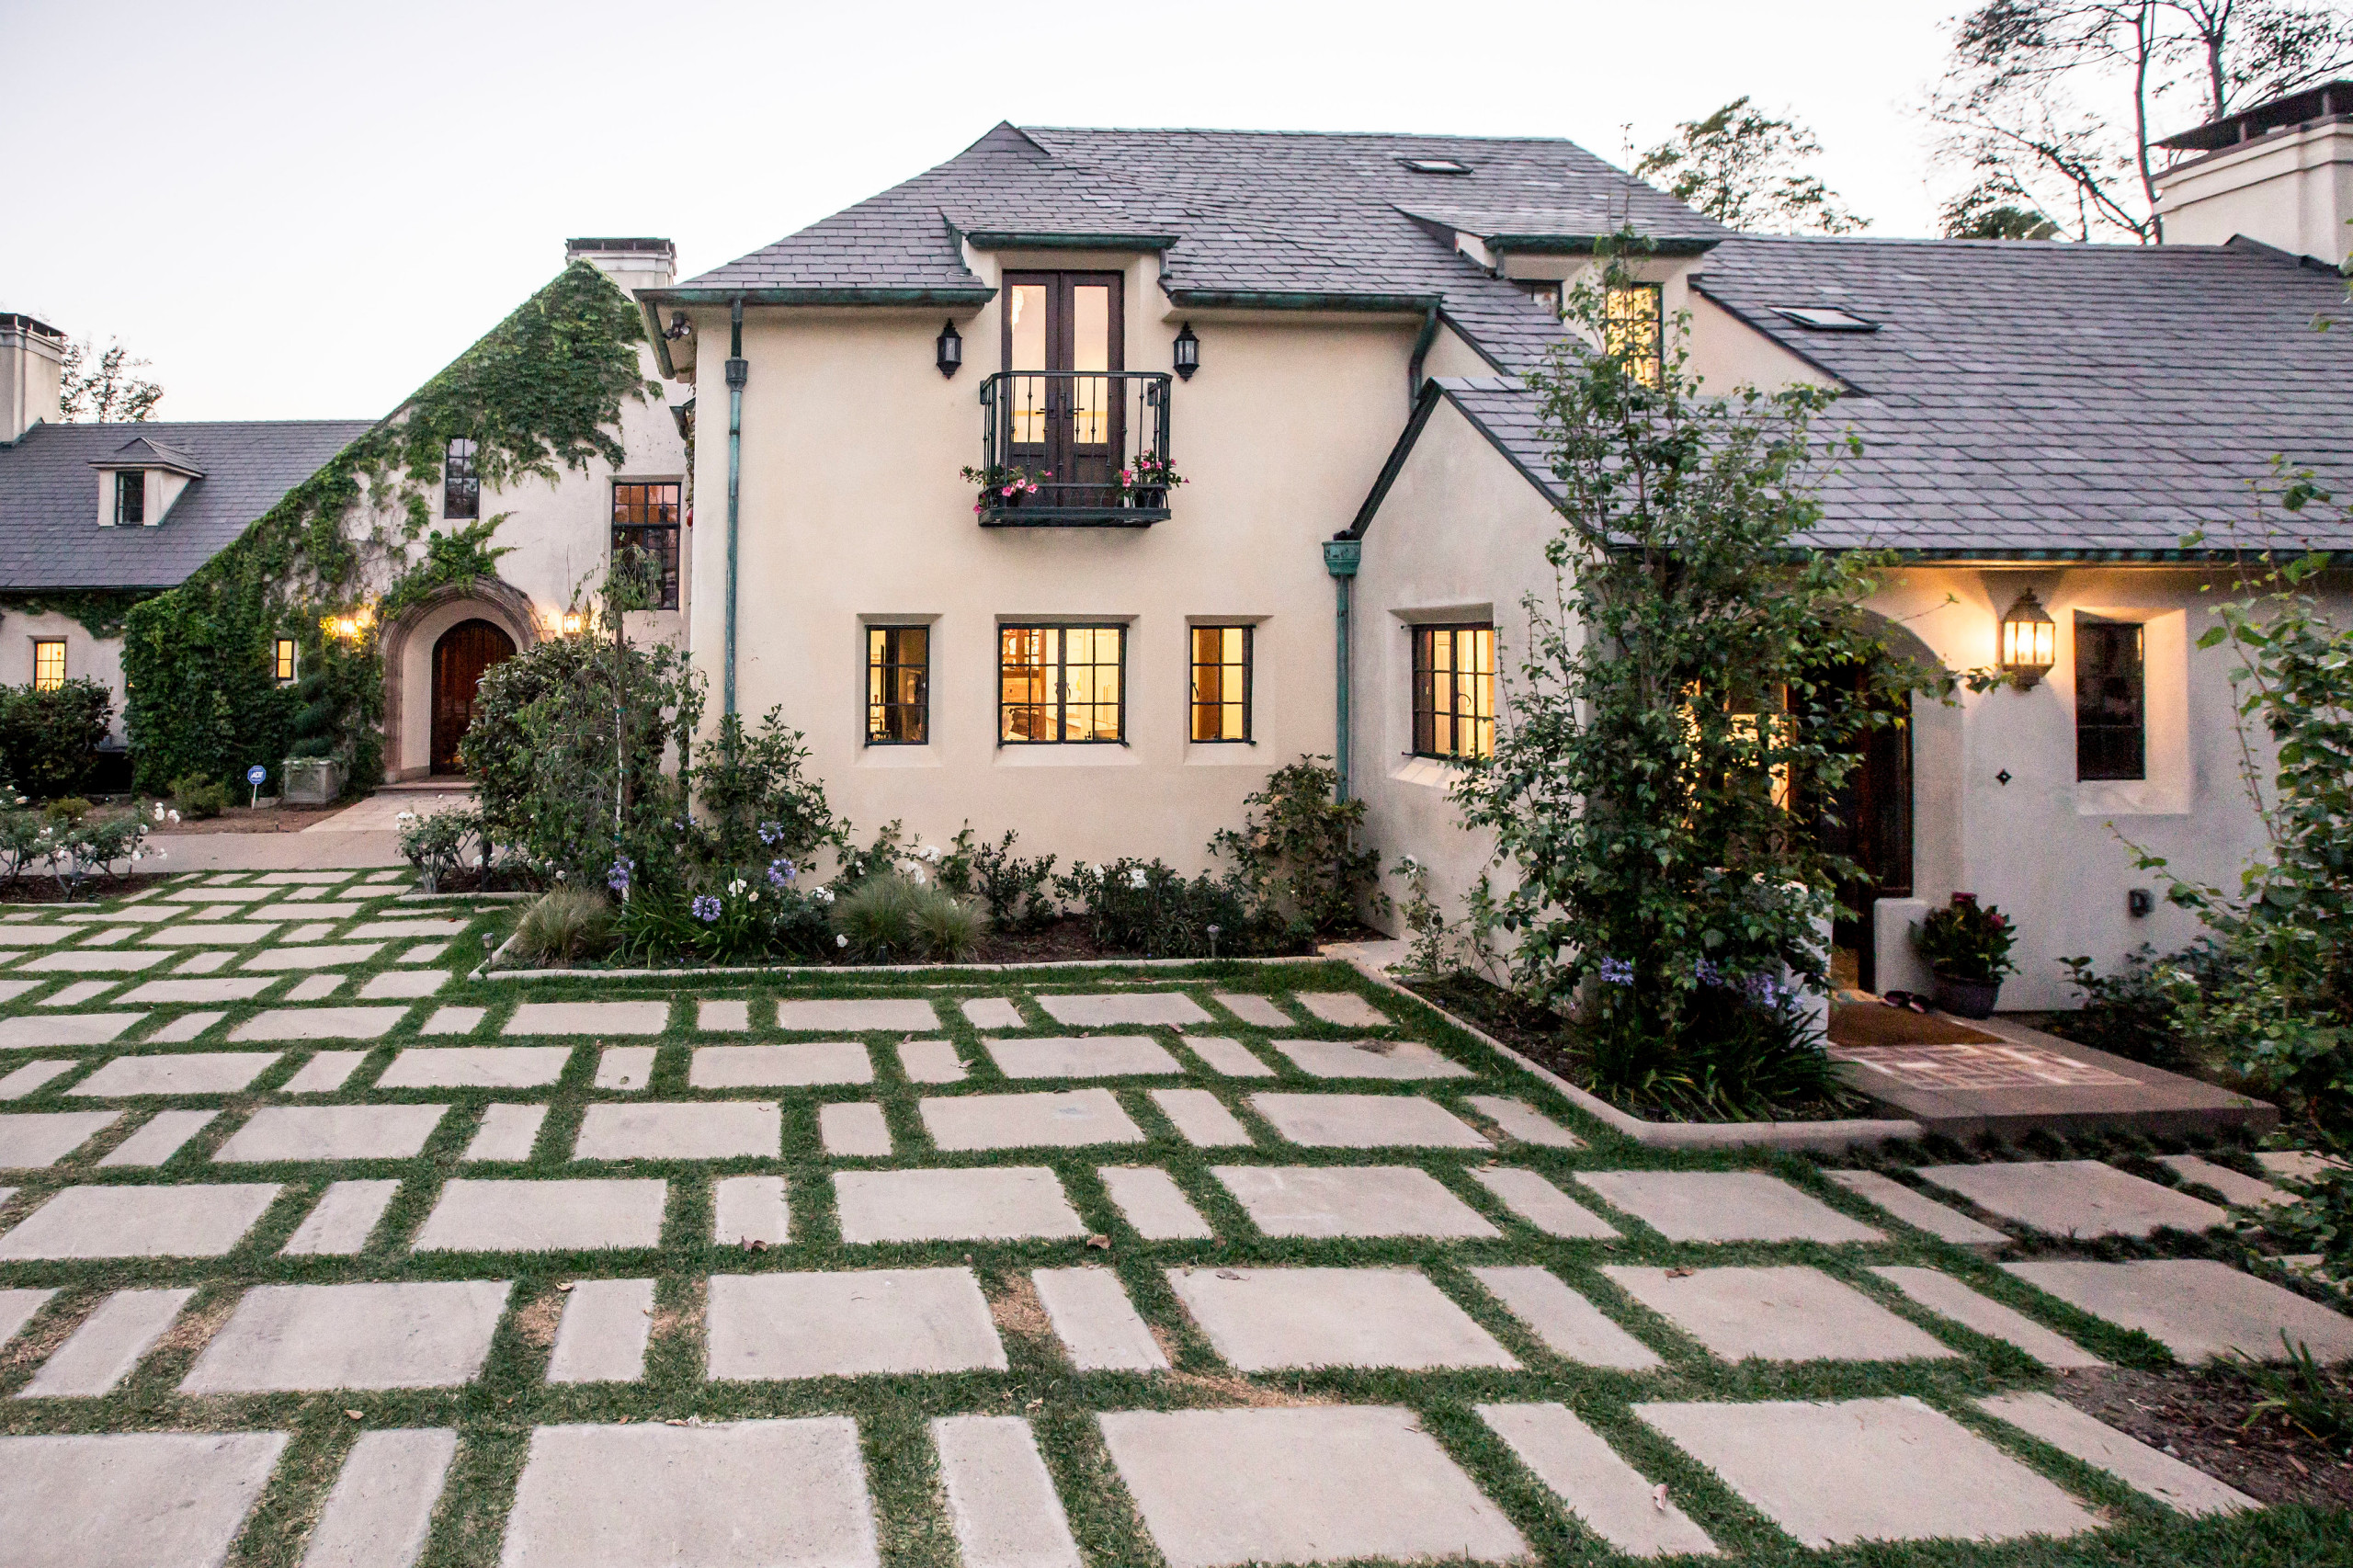 Renovations and Additions to a Historic Tudor Estate in Pasadena